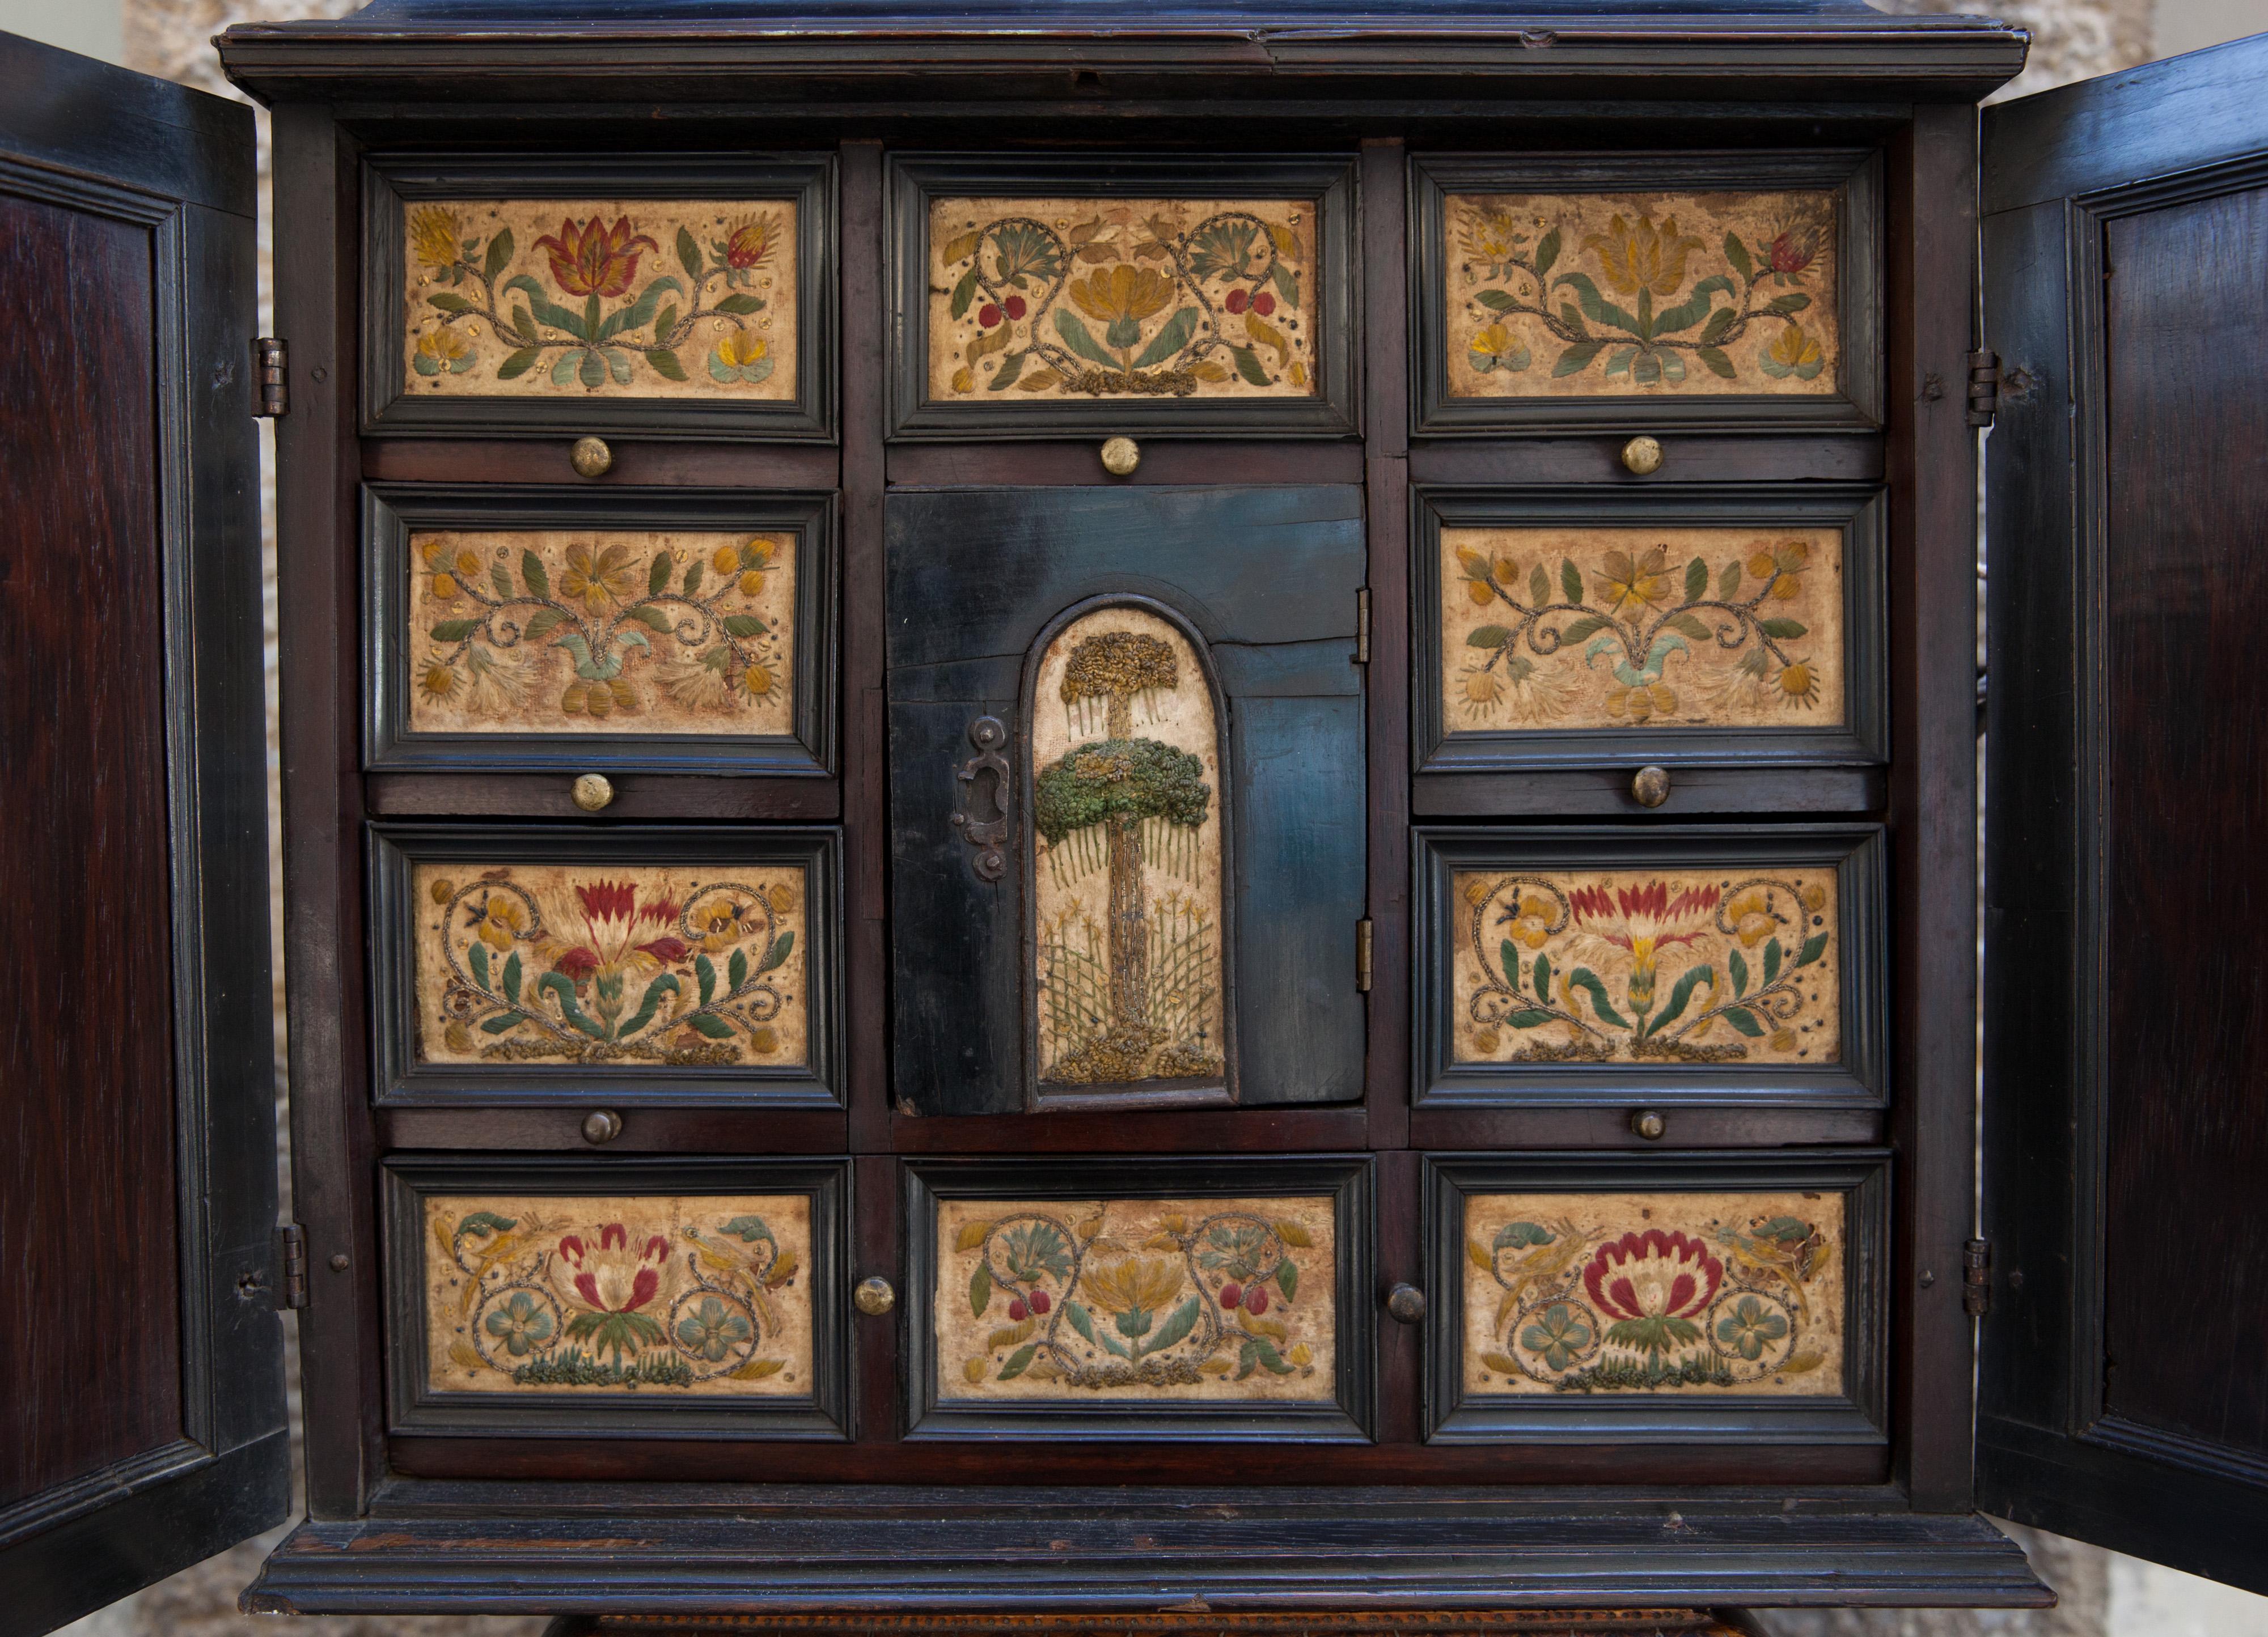 Collector's Cabinet.
Antwerp.
XVIIth century.
Ebony, wood (oak?) embroidered silk.
Restored, with some imperfections.

Two doors and top lid with locks.
Small upper drawers and one large lower drawer.

The choice of ebony and silk reflect the taste